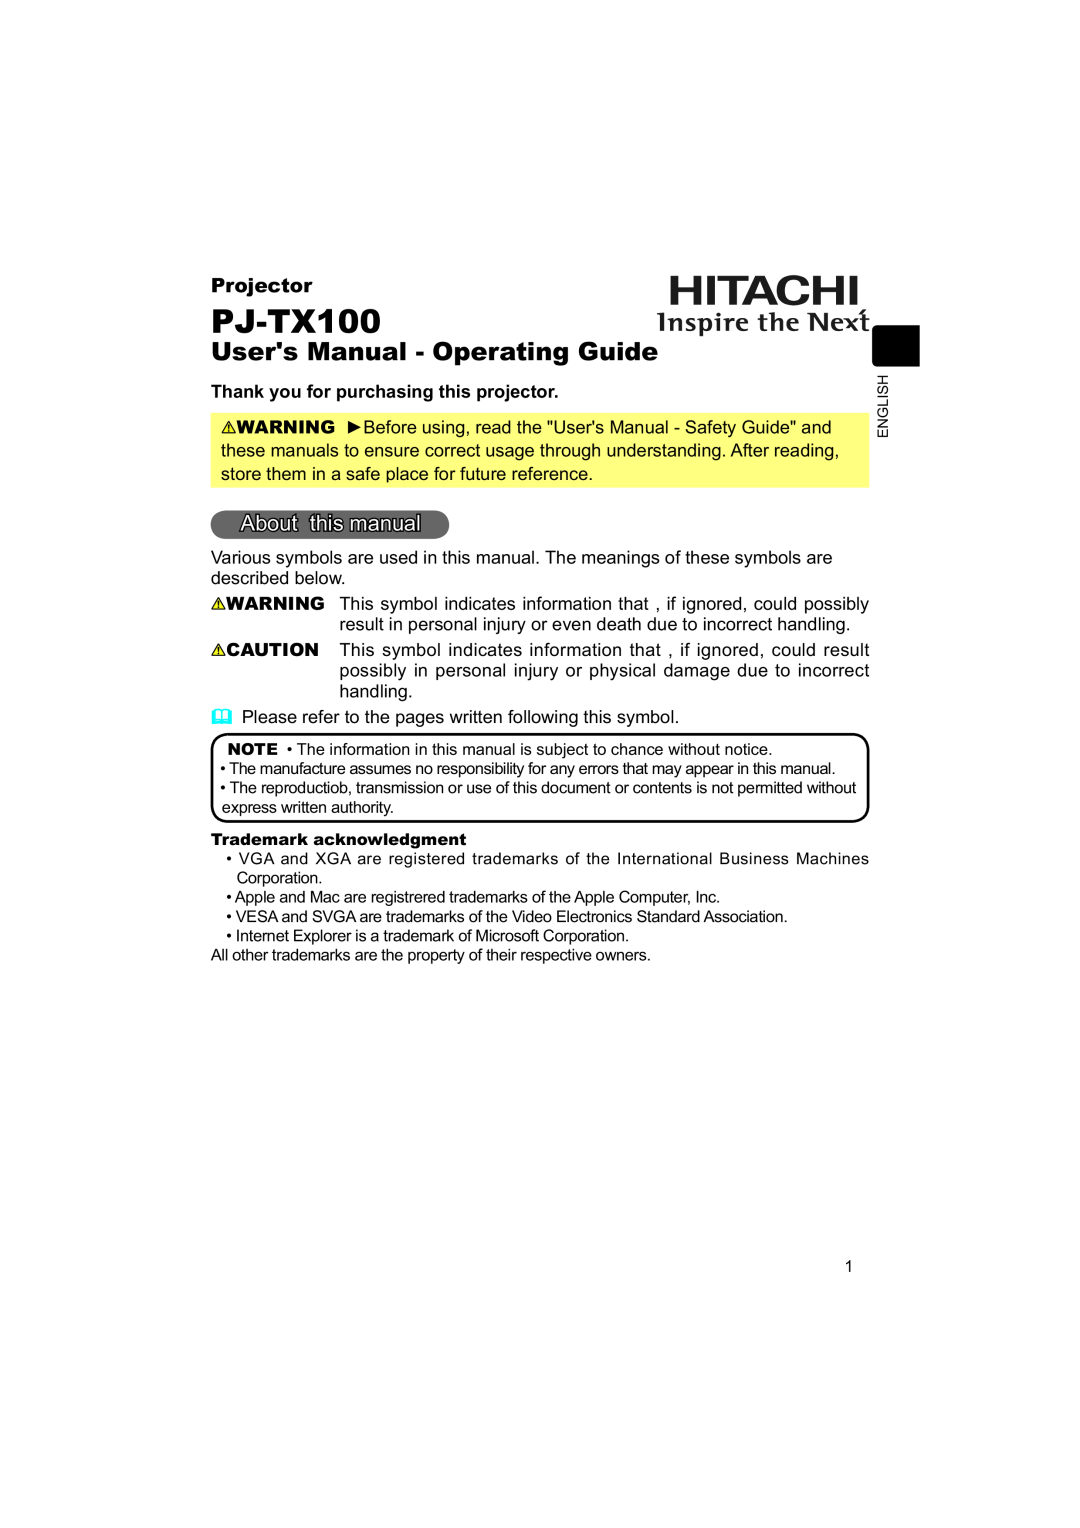 Hitachi PJ-TX100 user manual Users Manual - Operating Guide, About this manual, Projector 